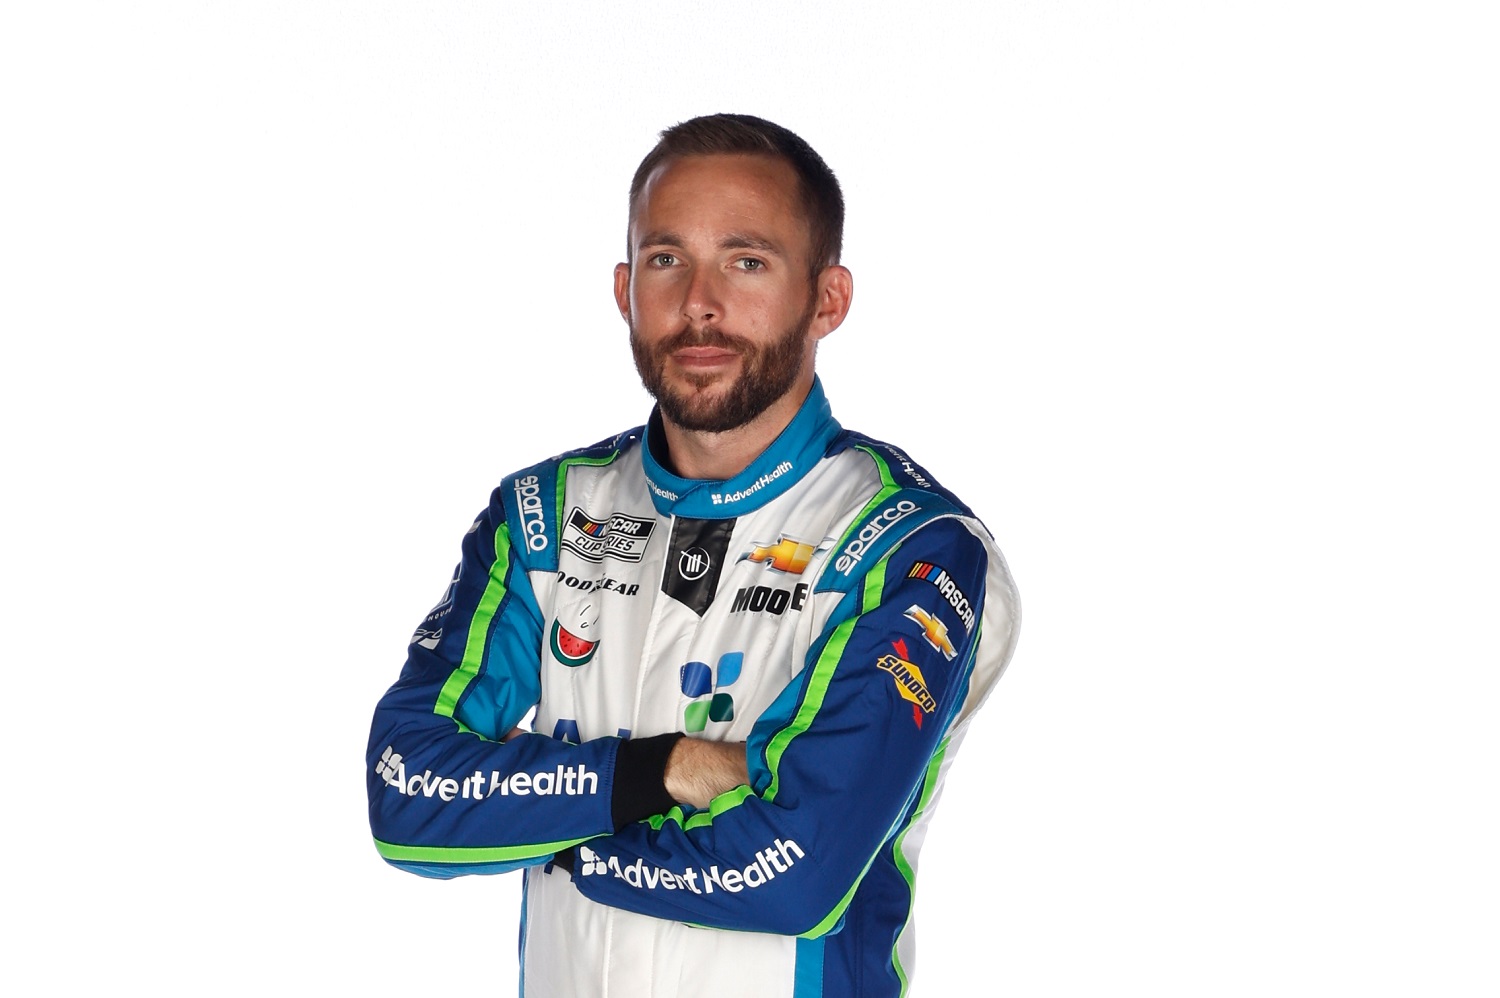 Ross Chastain poses for a photo during NASCAR Production Days at Clutch Studios on Jan. 18, 2022, in Concord, North Carolina. | Chris Graythen/Getty Images